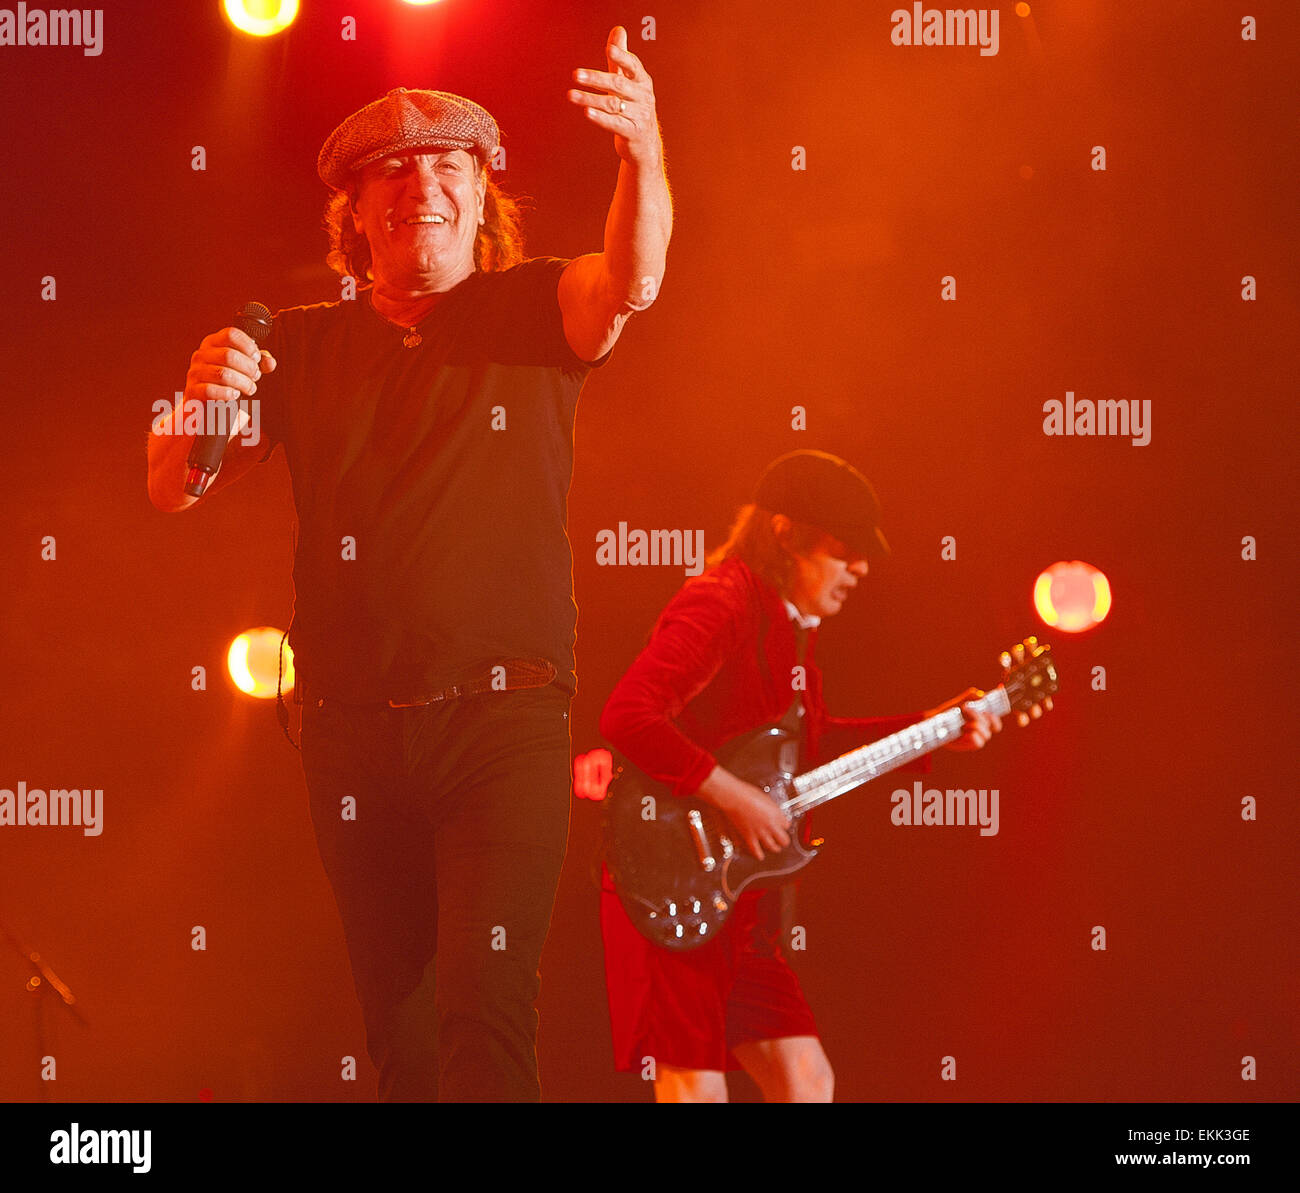 Indio, California, USA. 10th April, 2015. Guitarist ANGUS YOUNG and Singer BRIAN JOHNSON of the band AC/DC performs live as part of the 2015 Coachella Music & Arts Festival that is taking place at the Empire Polo Field. The three day festival will attract thousands of fans to see a variety of artist on five different stages. Copyright 2015 Jason Moore. Credit:  Jason Moore/ZUMA Wire/Alamy Live News Stock Photo